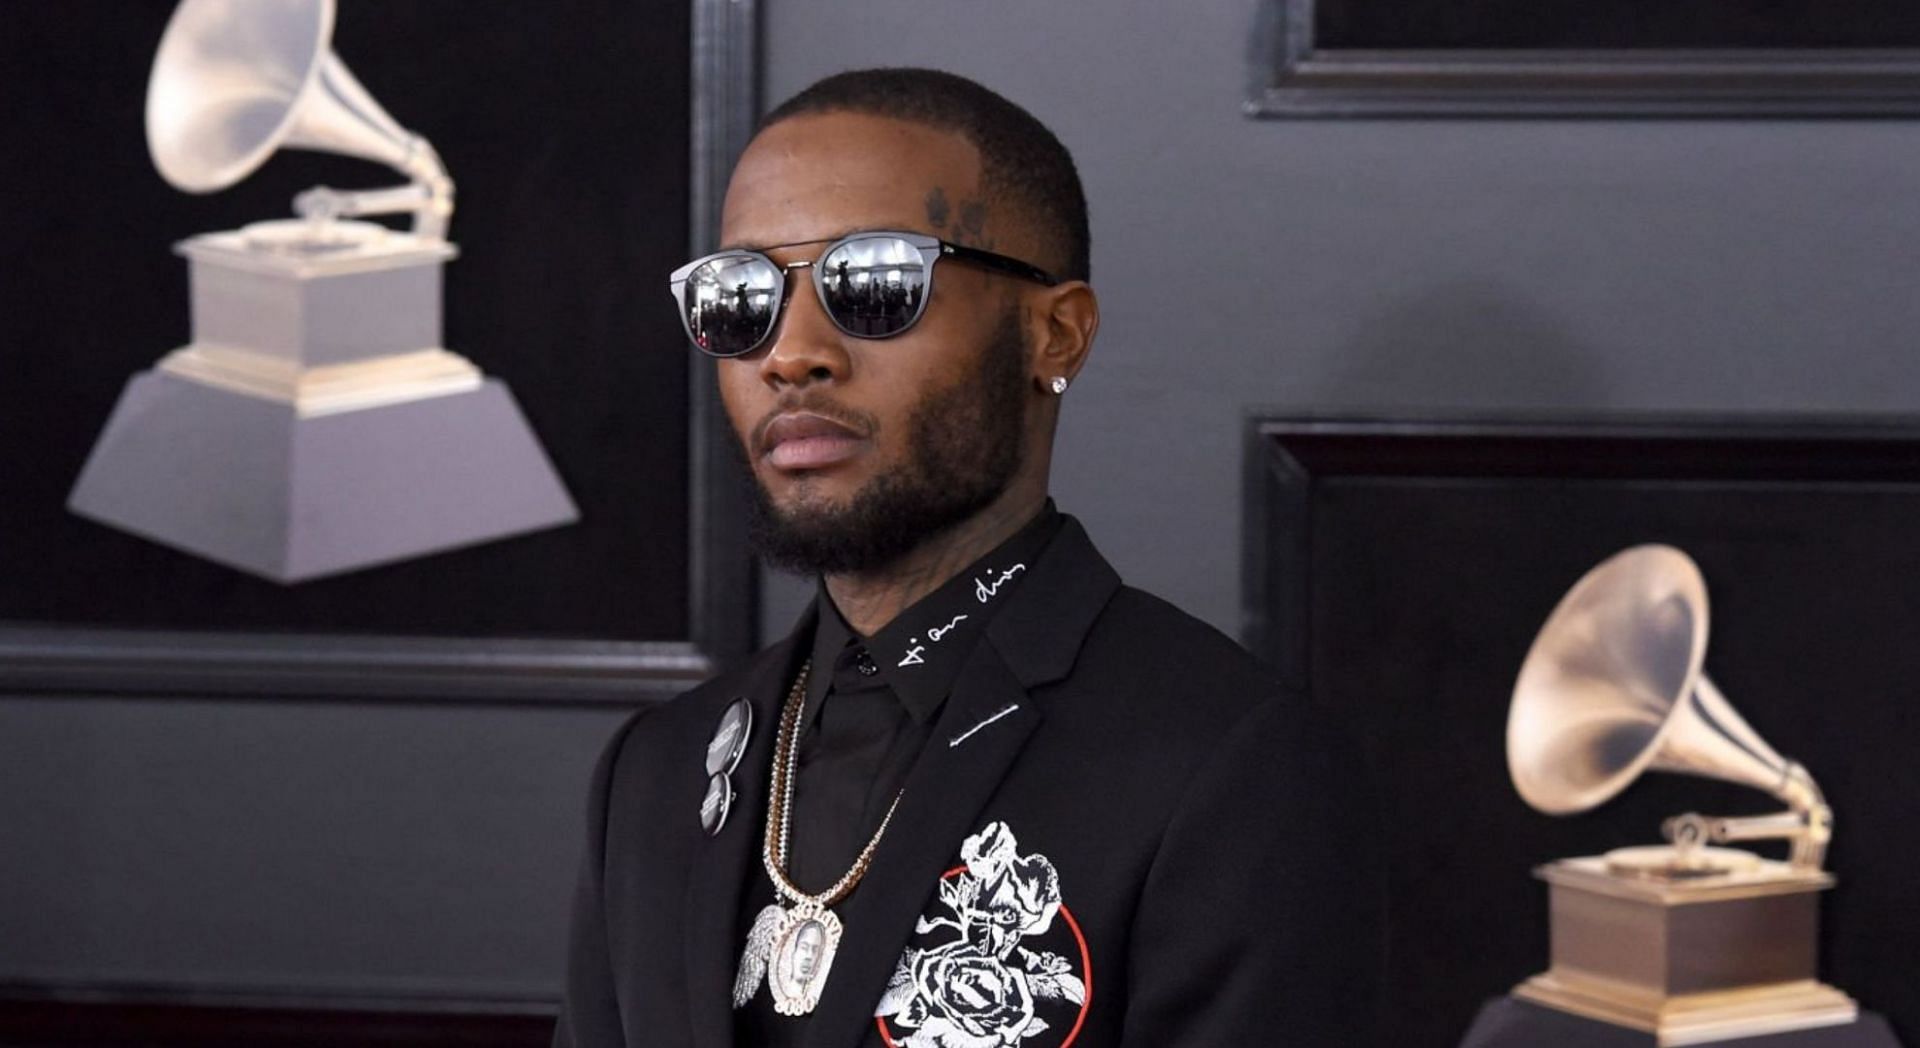 Rapper Shy Glizzy has been accused of alleged misconduct (Image via Getty Images)